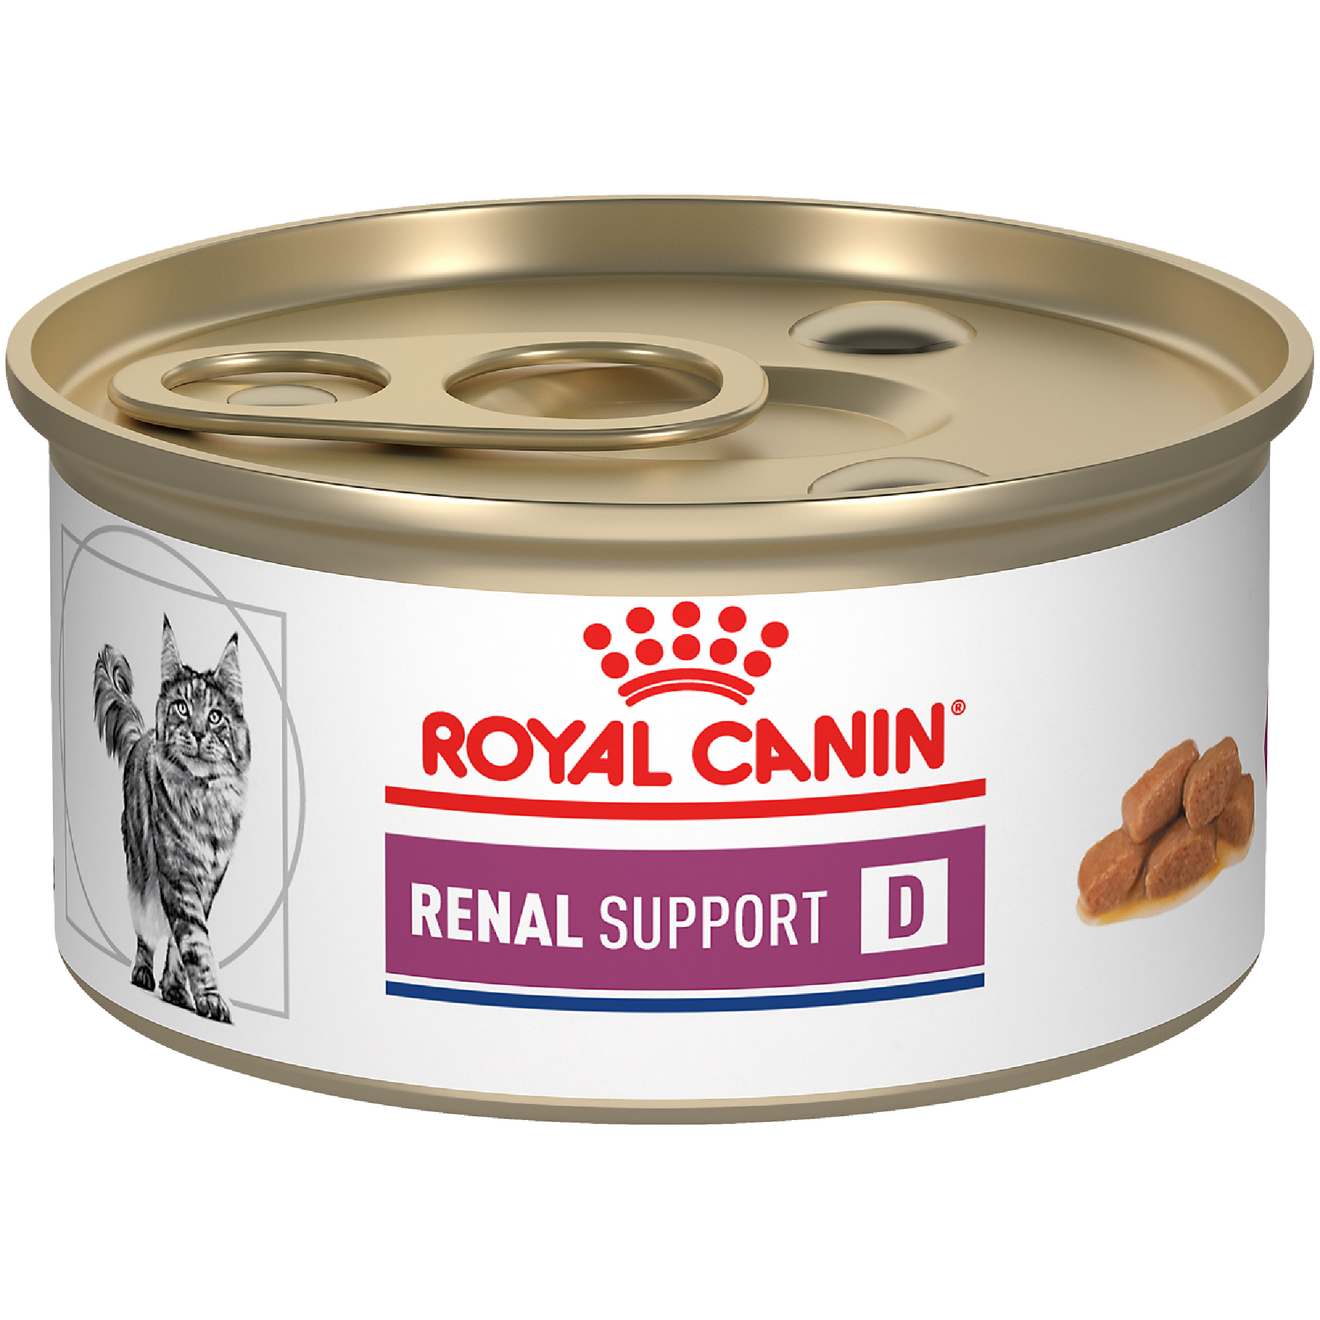 RENAL SUPPORT D Gato Lata